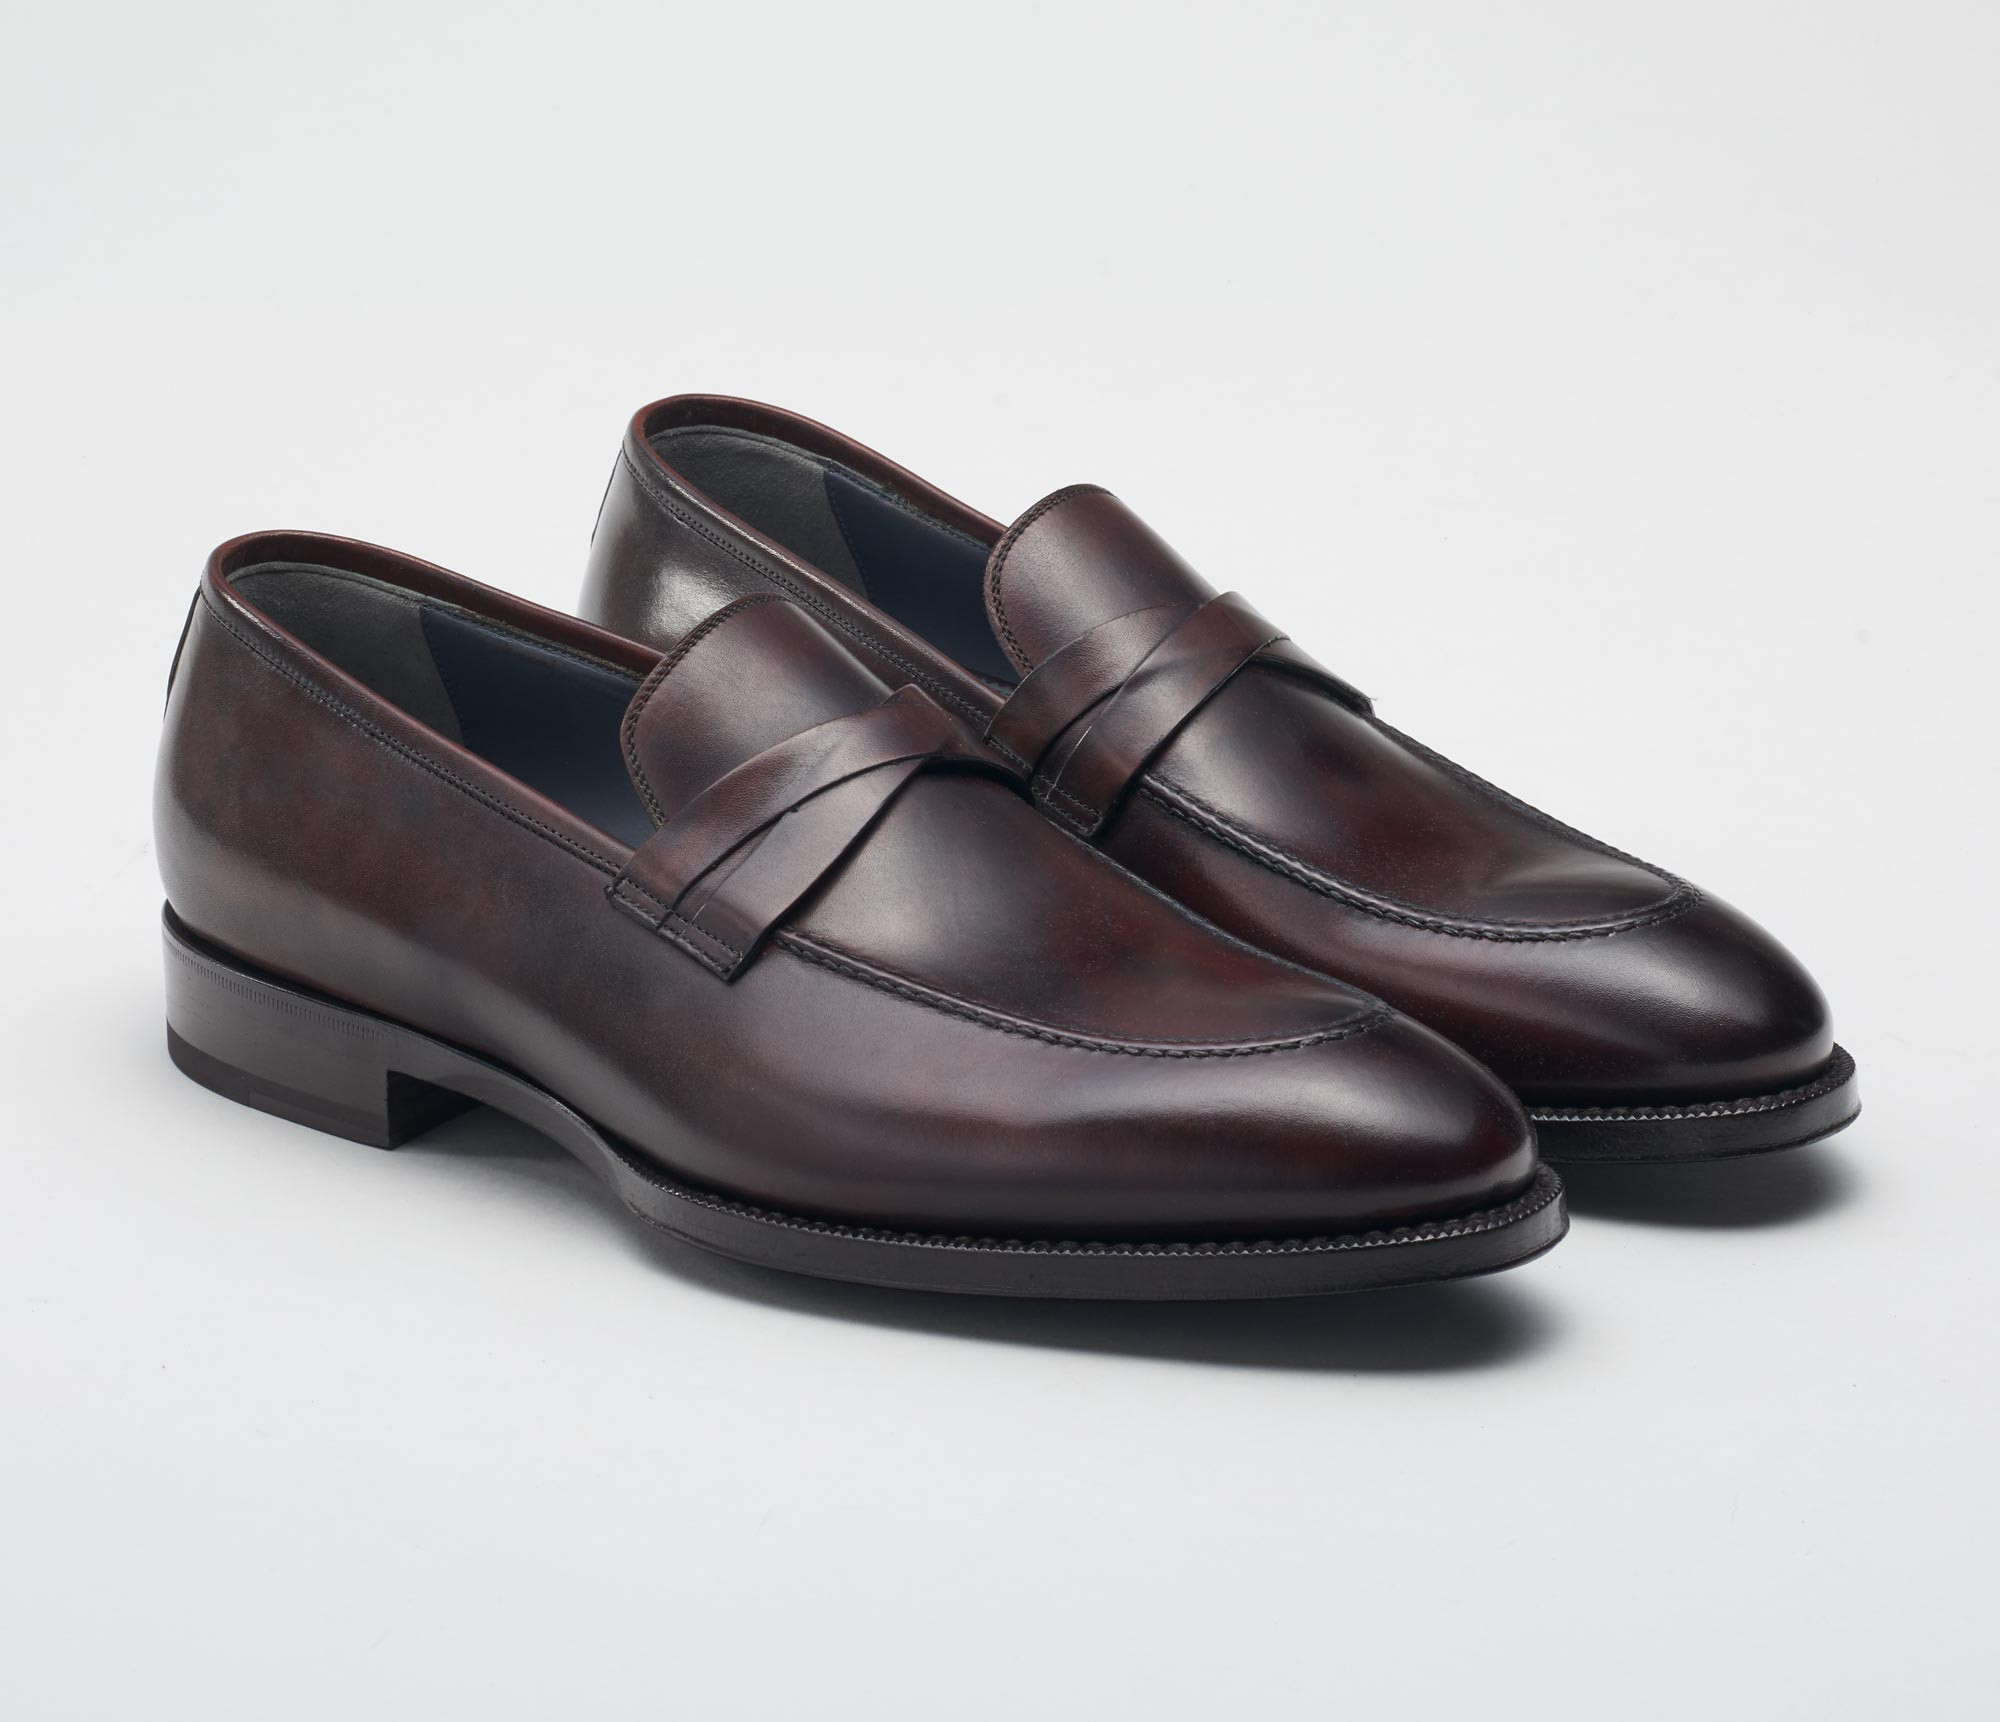 Siena Leather Loafer in Nero Fondente